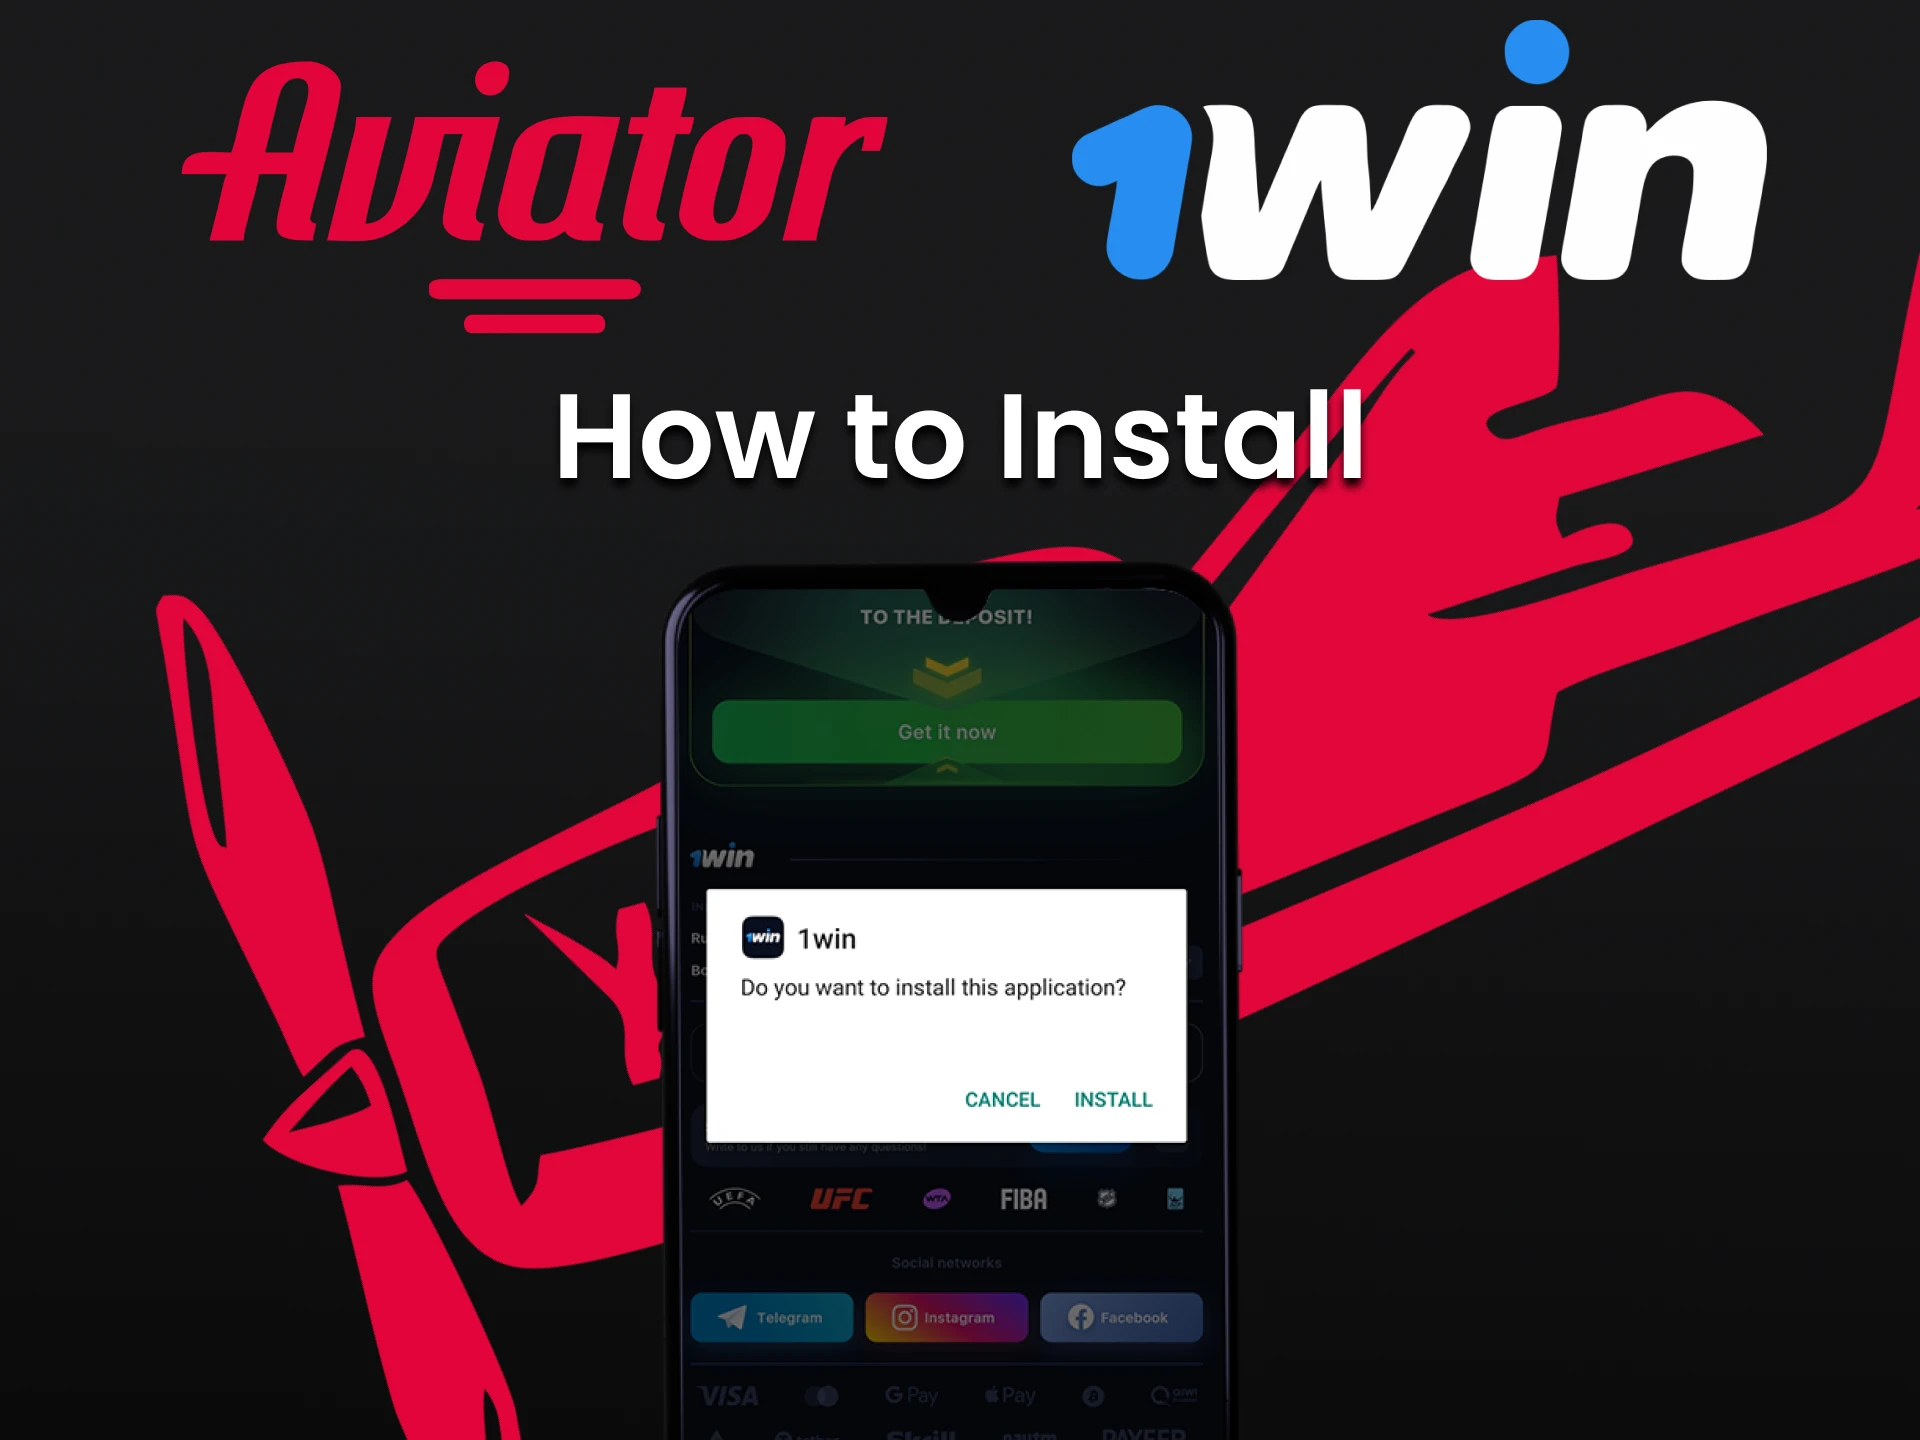 Follow the installation process of the 1win application to play Aviator.